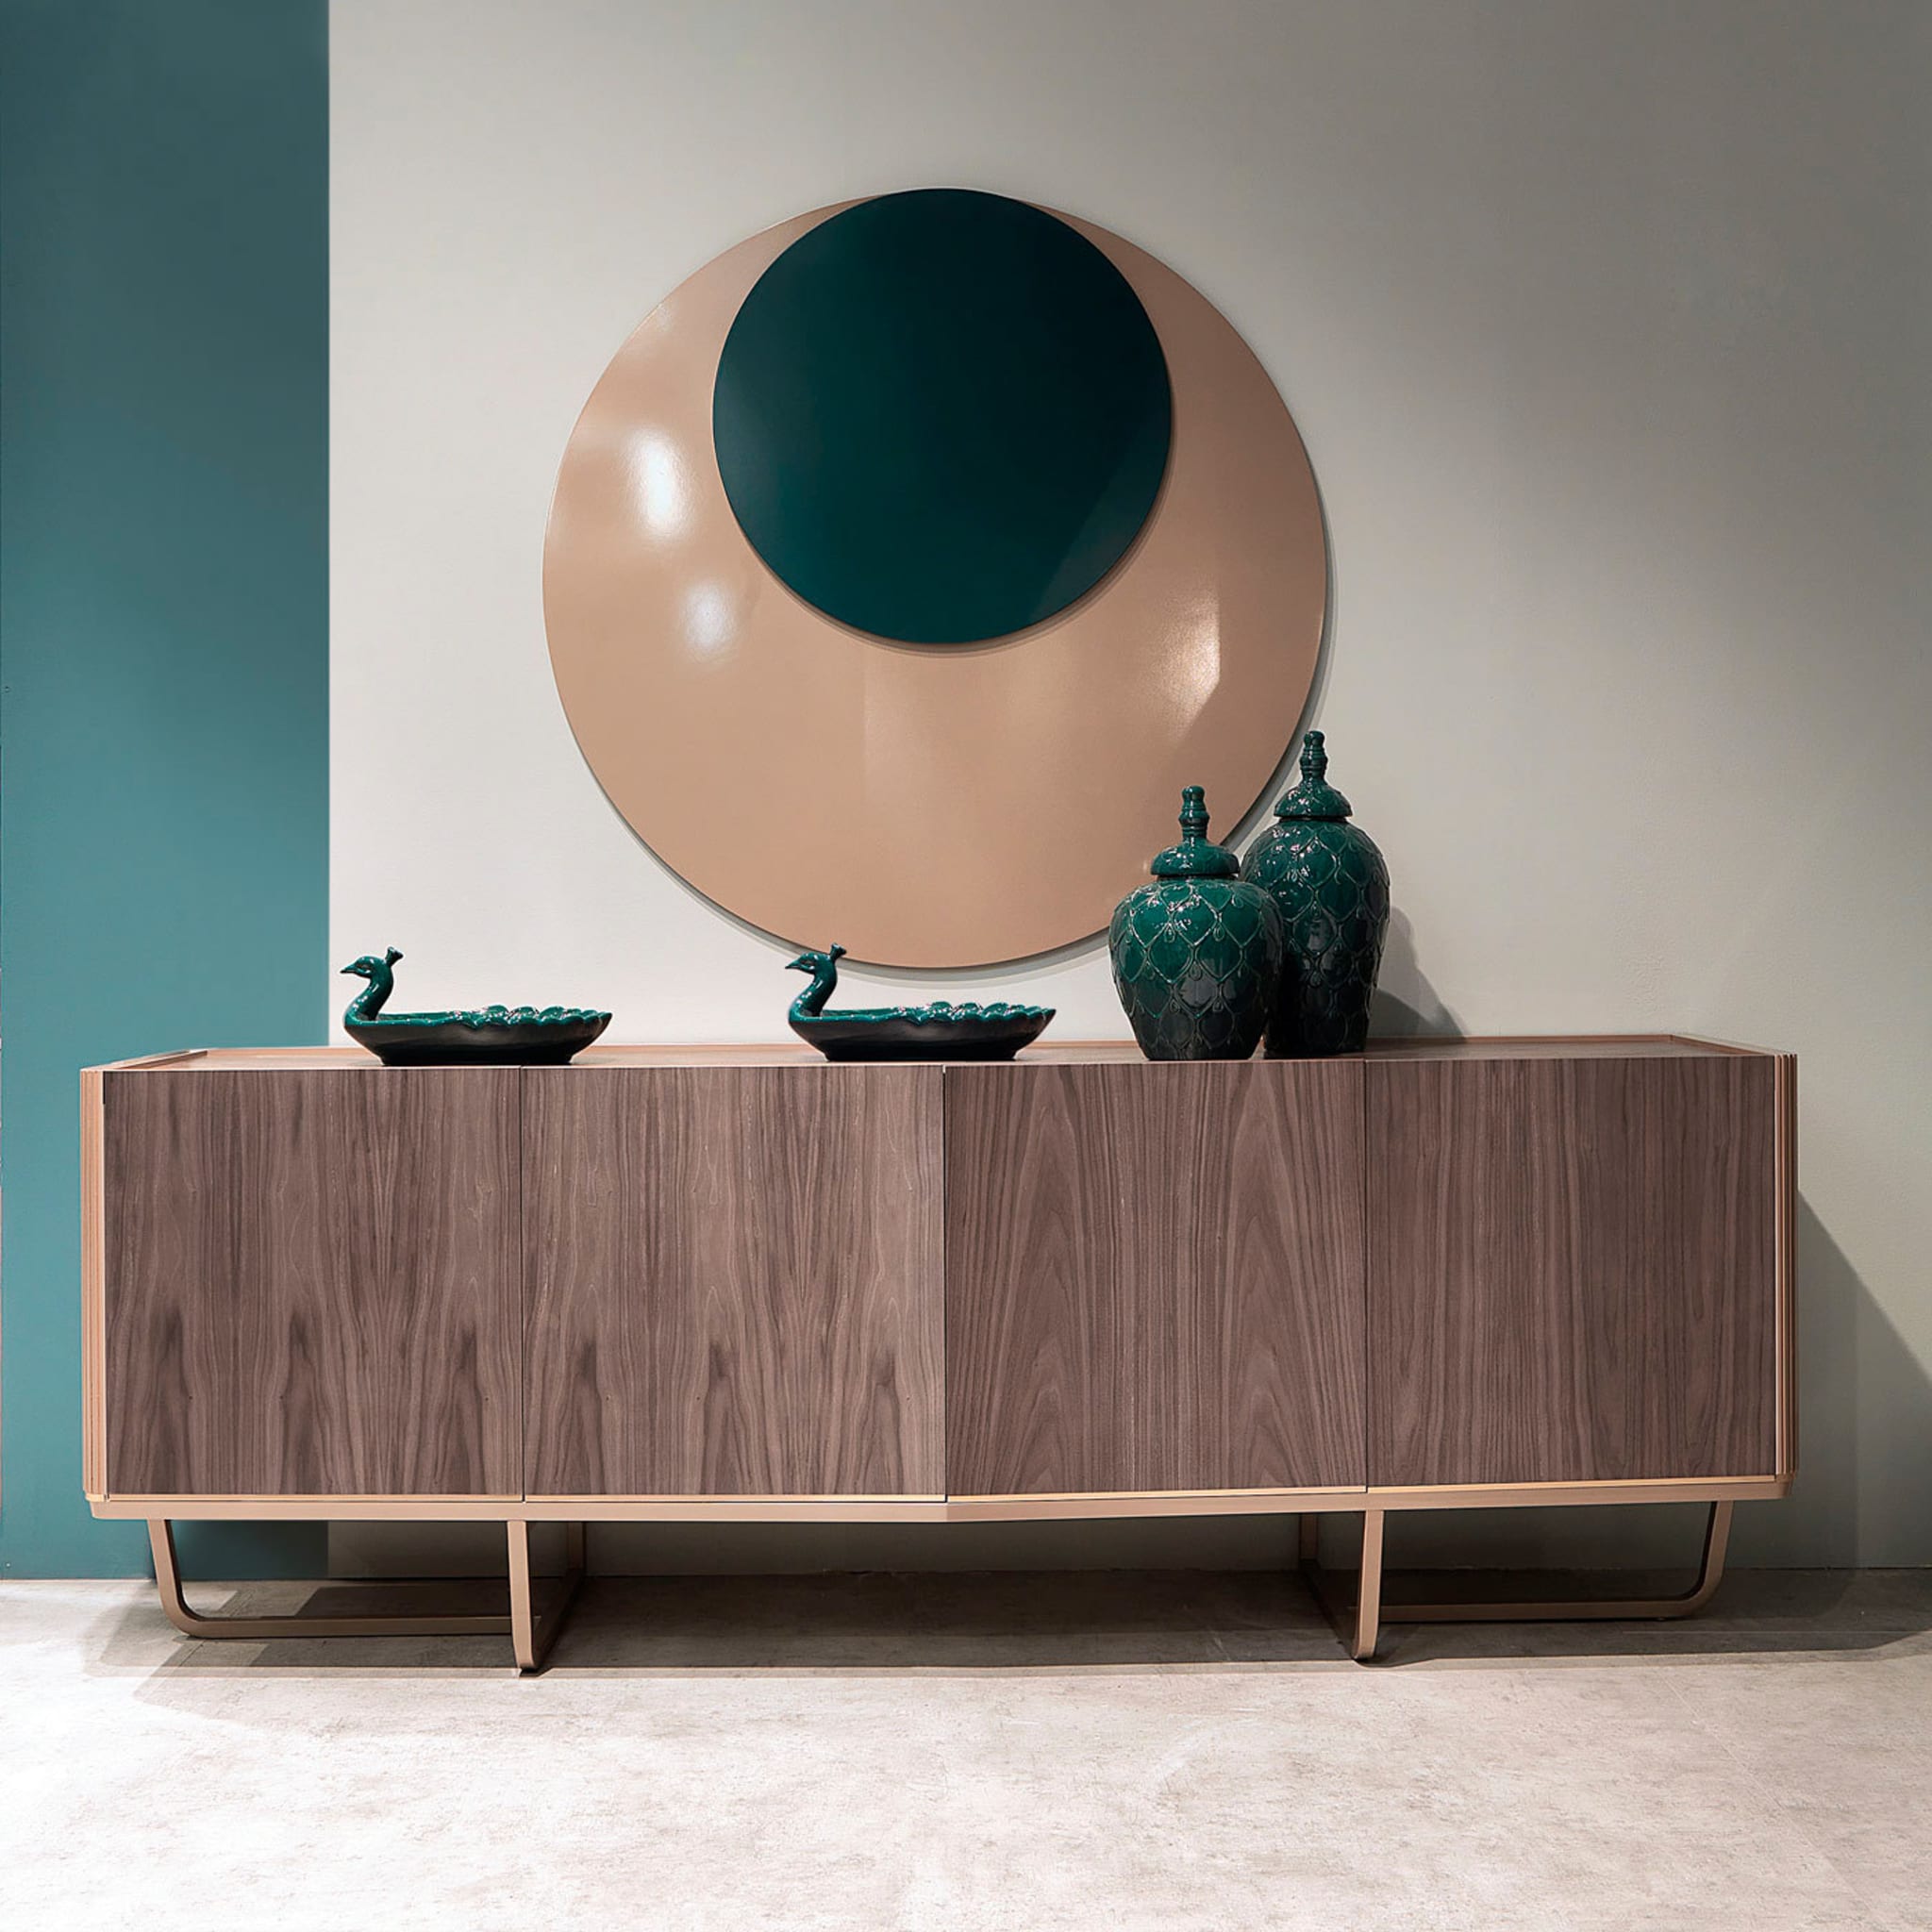 Beverly 4-Door Canaletto Sideboard by Silvano Del Guerra - Alternative view 1